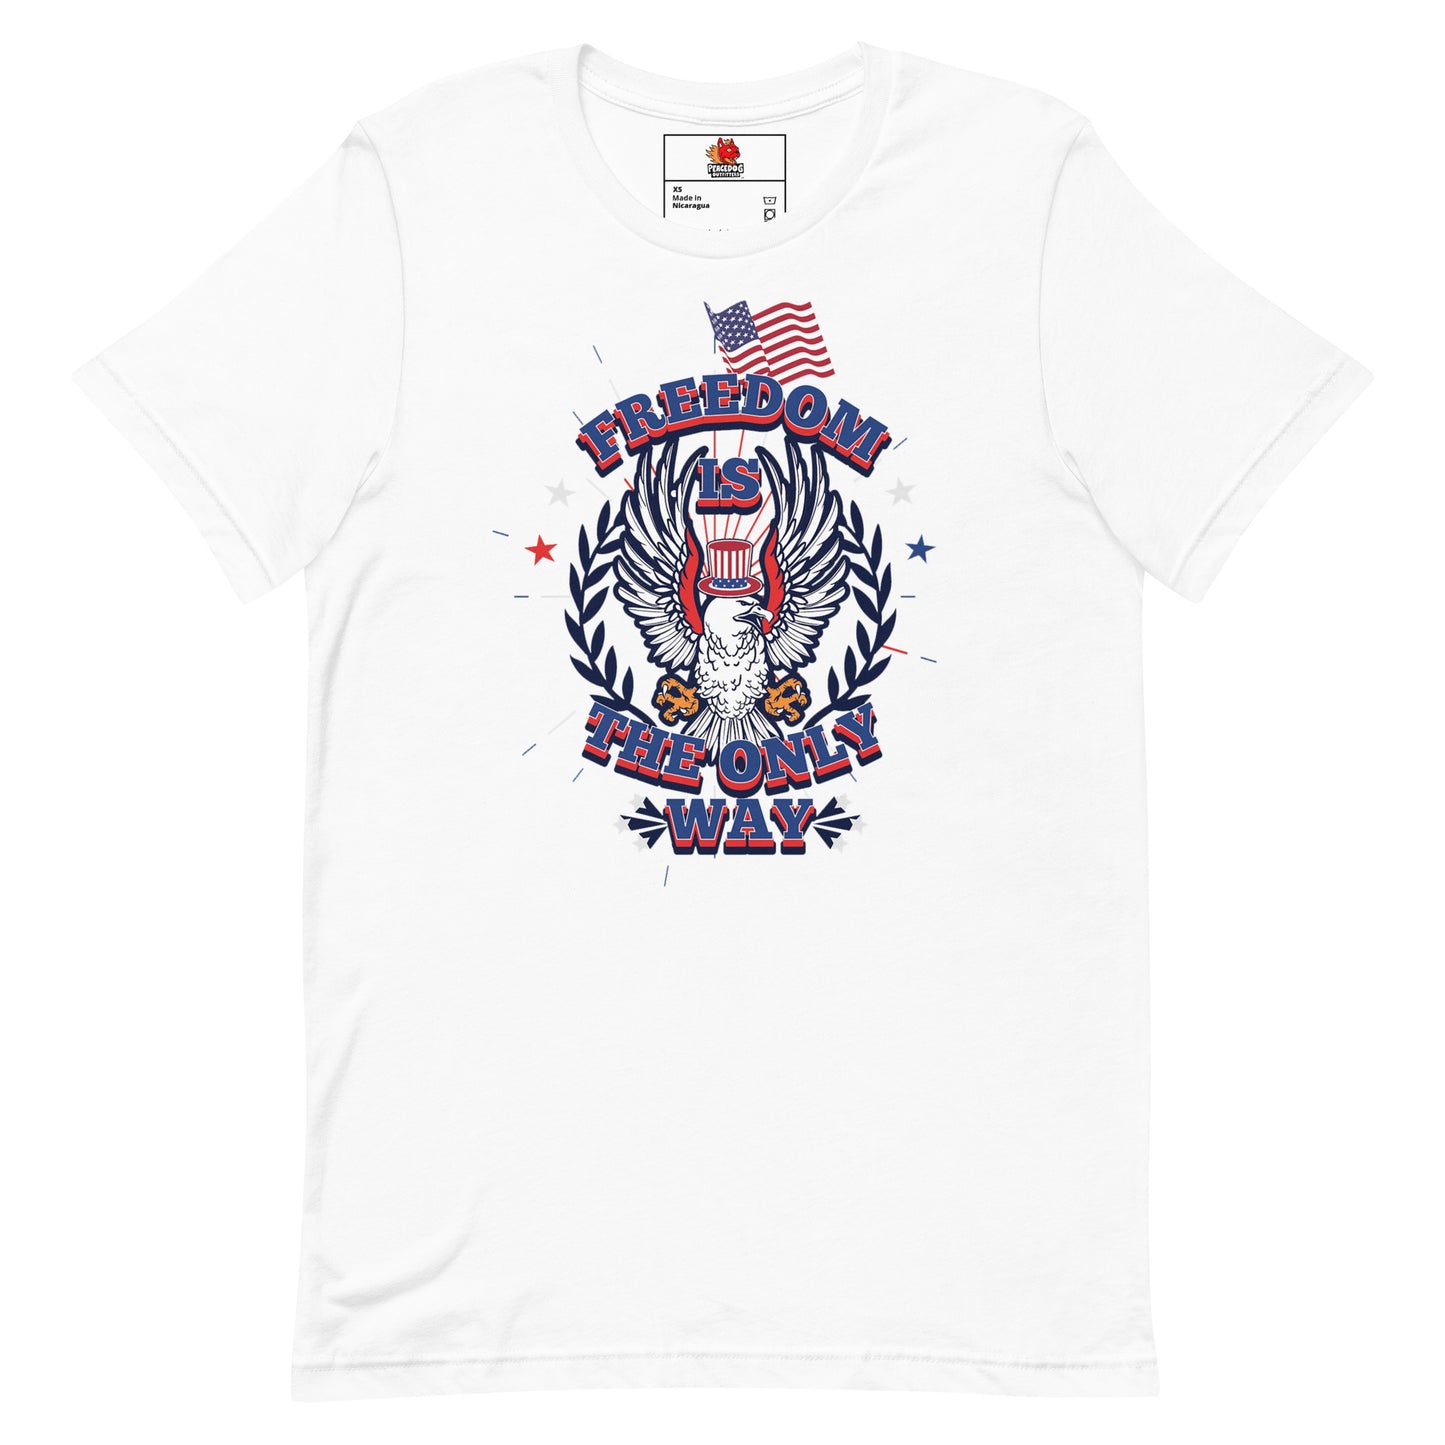 US "Freedom is the Only Way" T-shirt